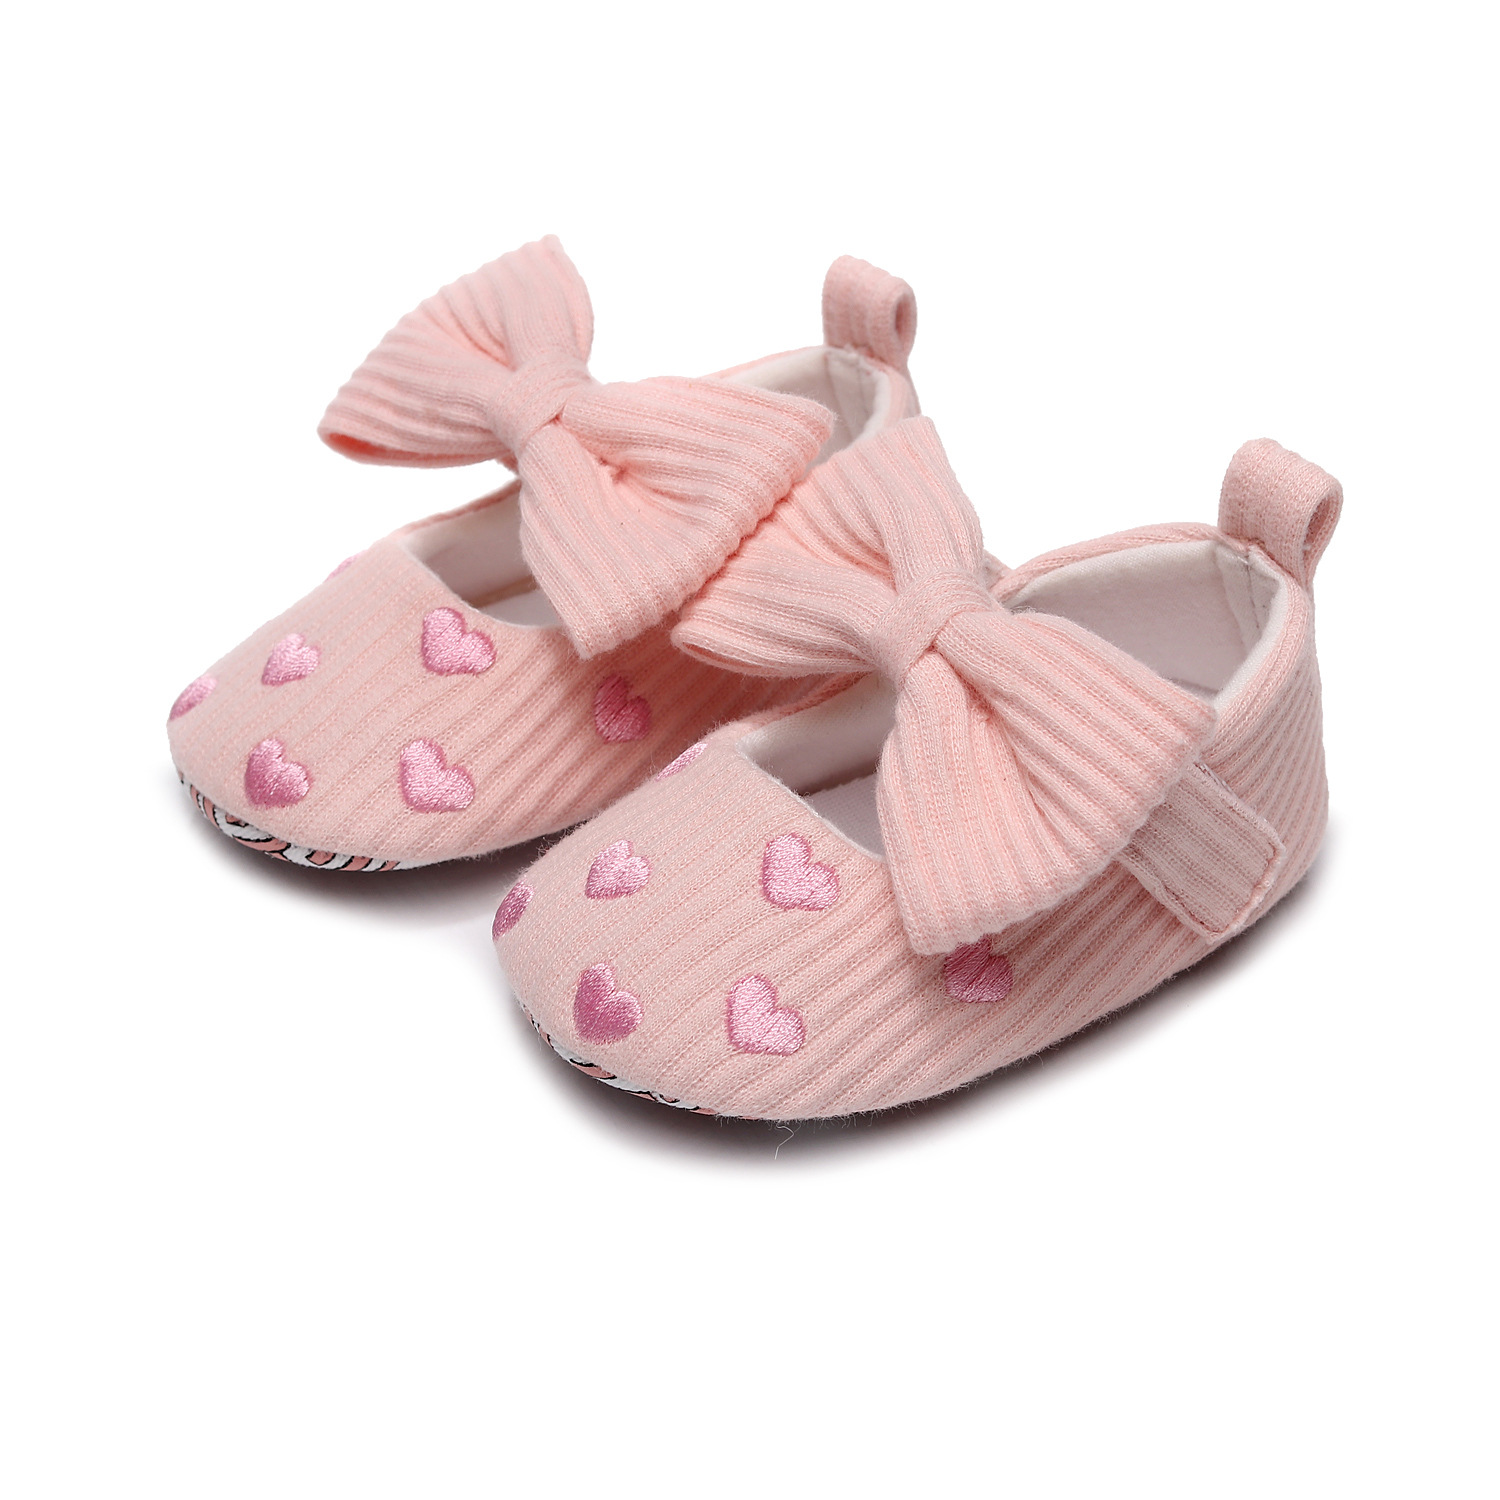 baby shoe Autumn New Embroidered Peach Heart Bow Princess Single Shoes Girls' Shoes Baby Baby Non-Slip Toddler Shoes Wholesale